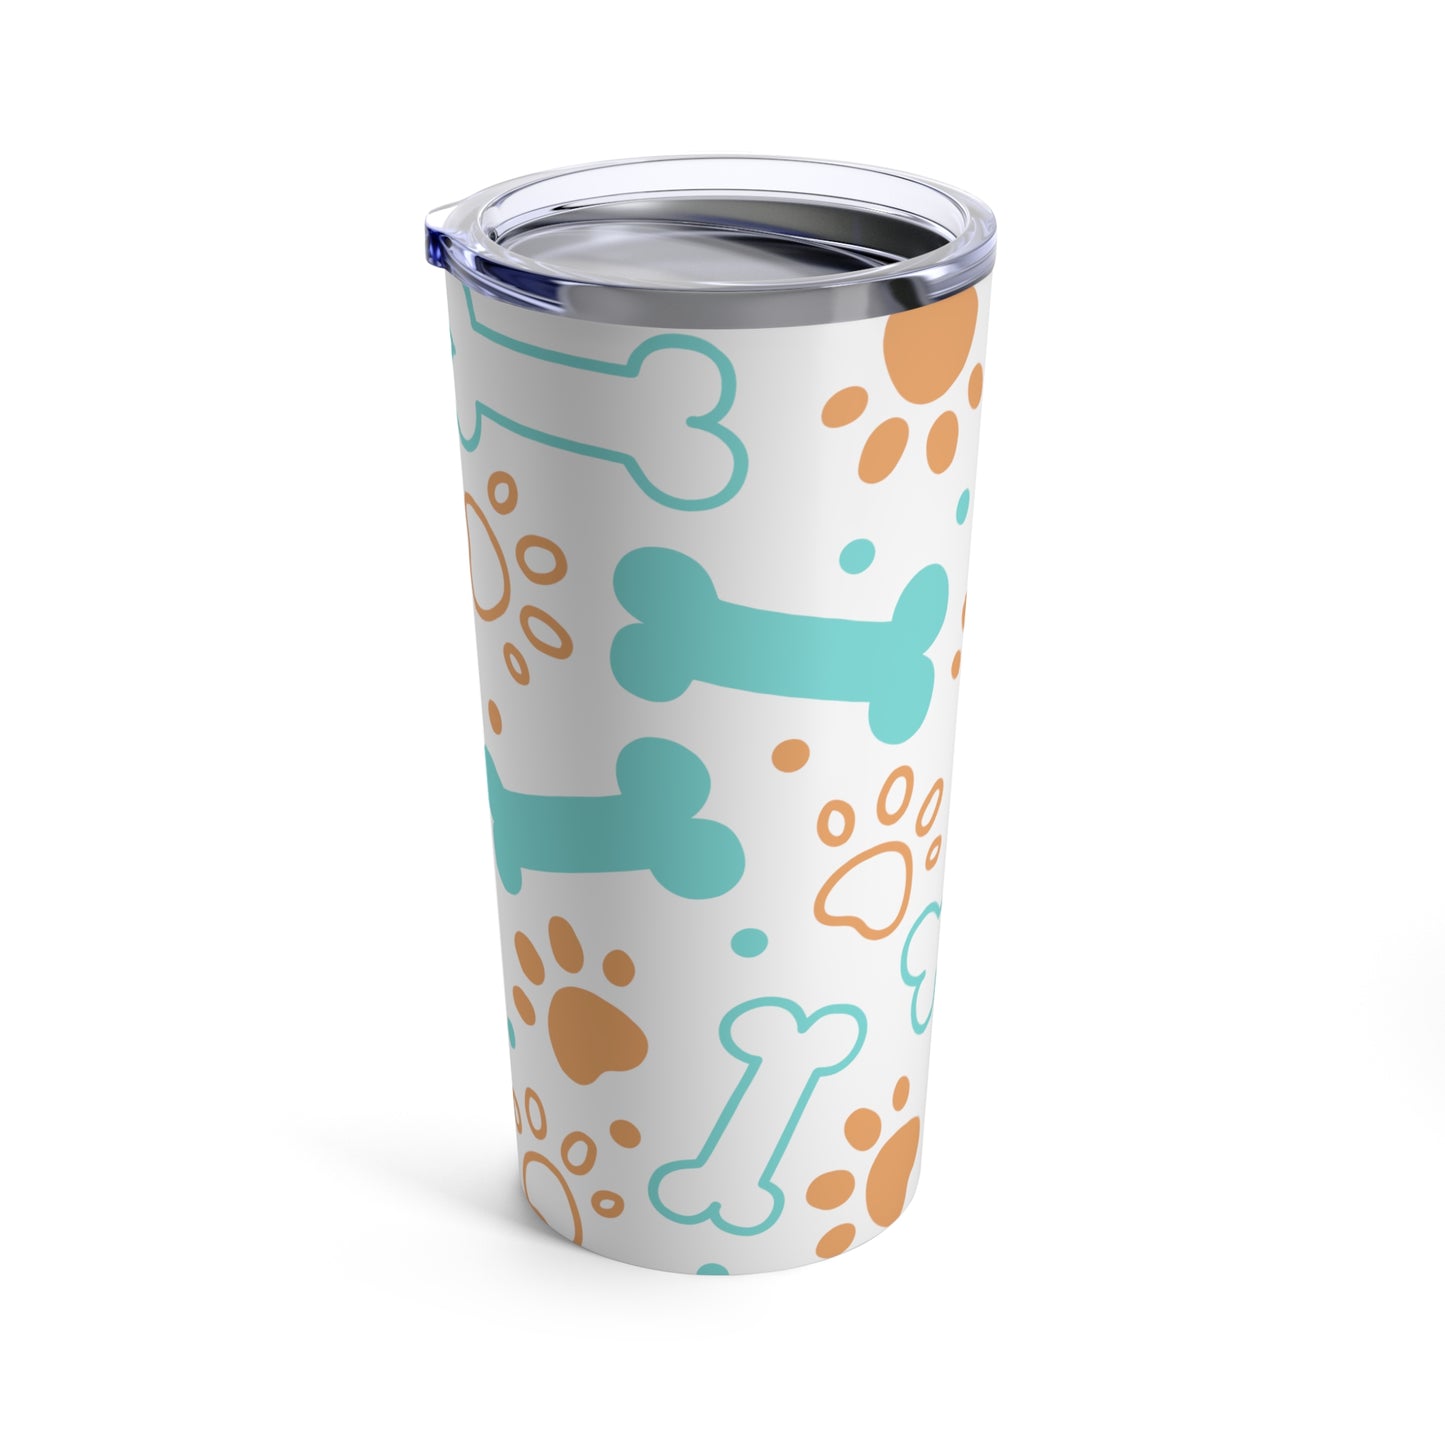 A Printify Dog Lover Tumbler: 20 oz. Stainless steel; Insulated with paw prints and dog paws on it, perfect for a Dog Lover.